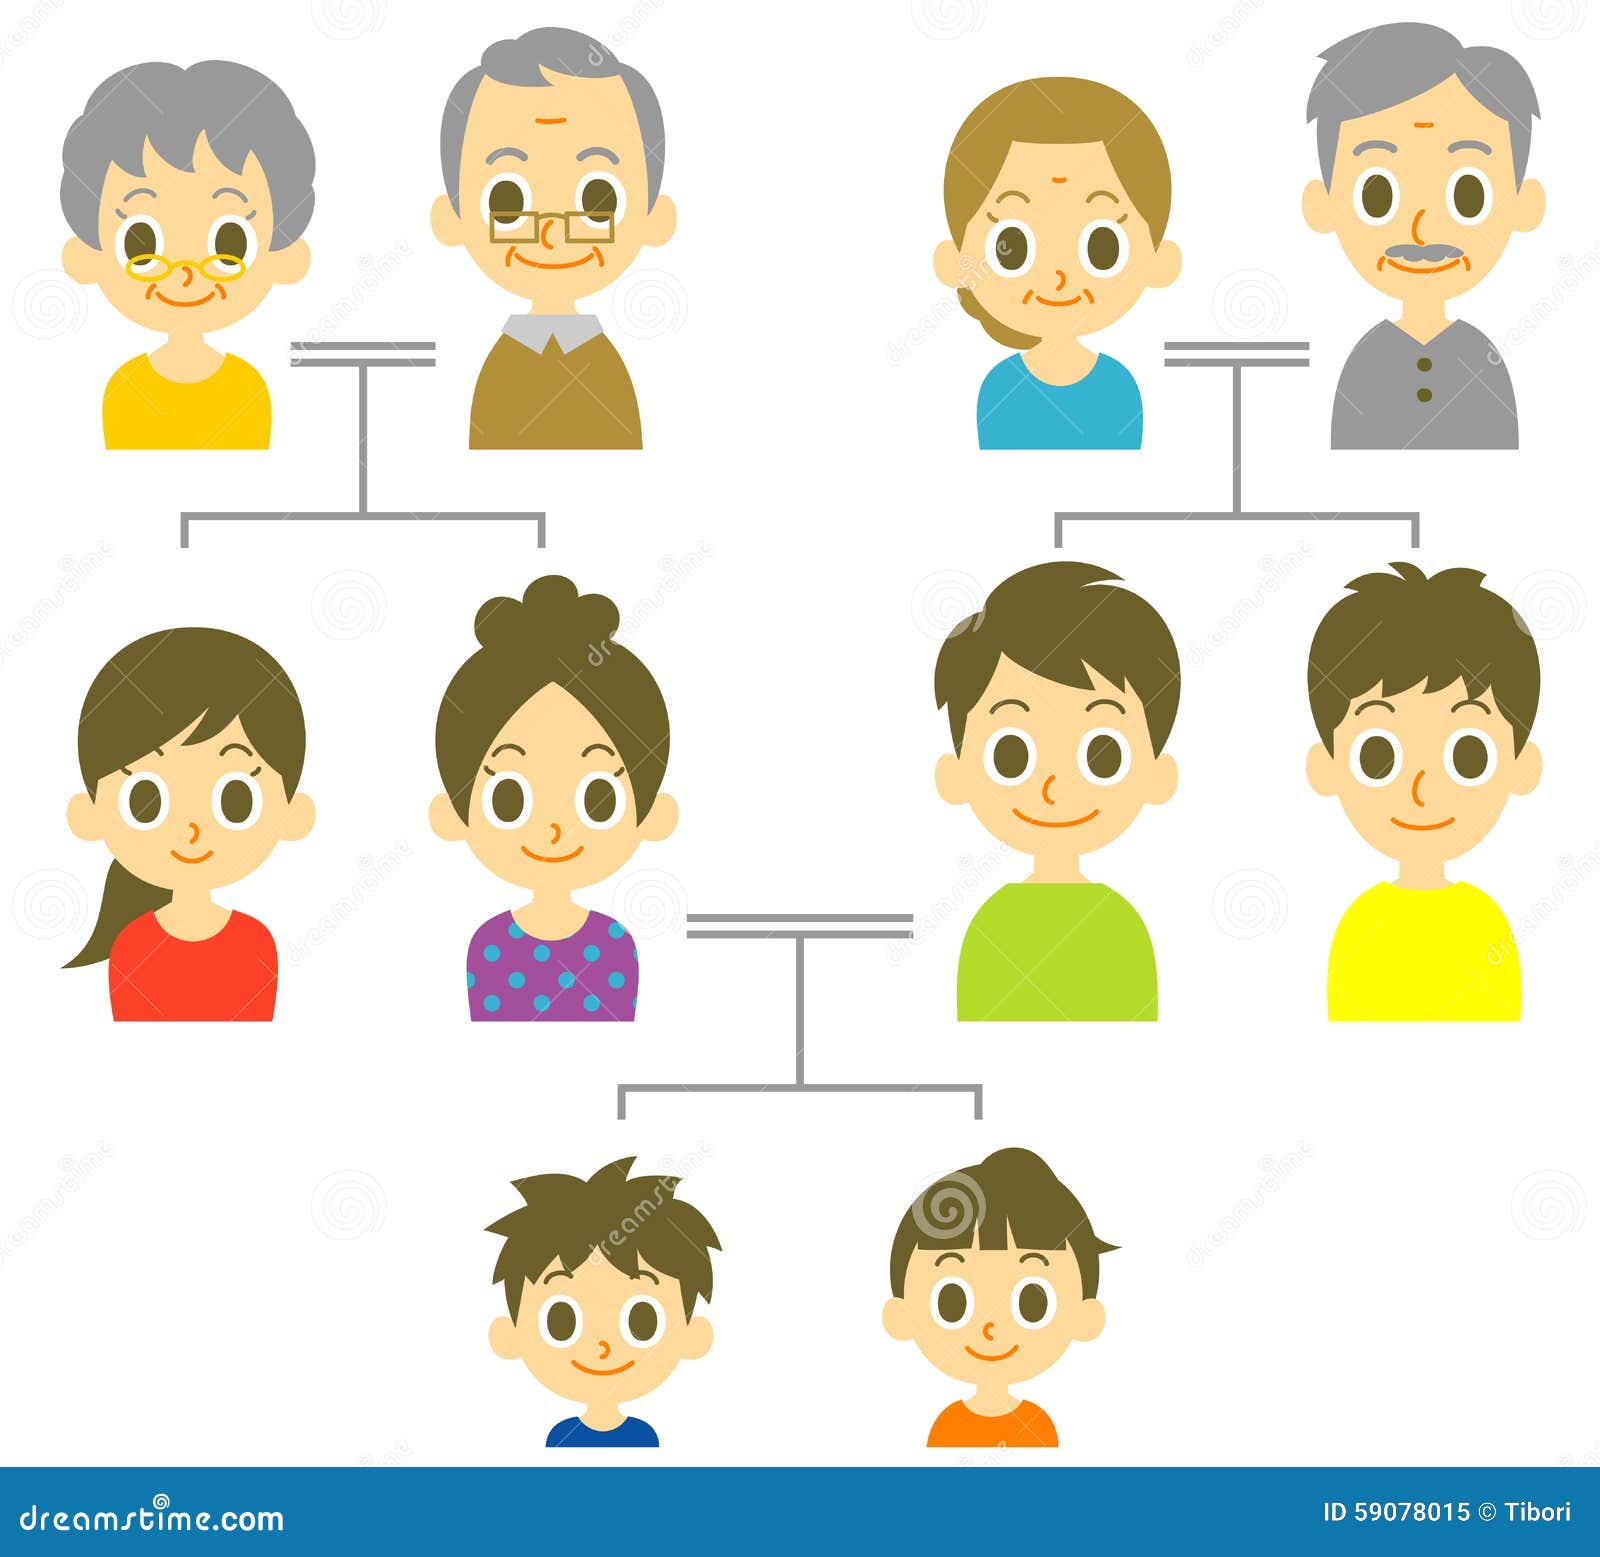 Three Generation Family Tree Template from thumbs.dreamstime.com